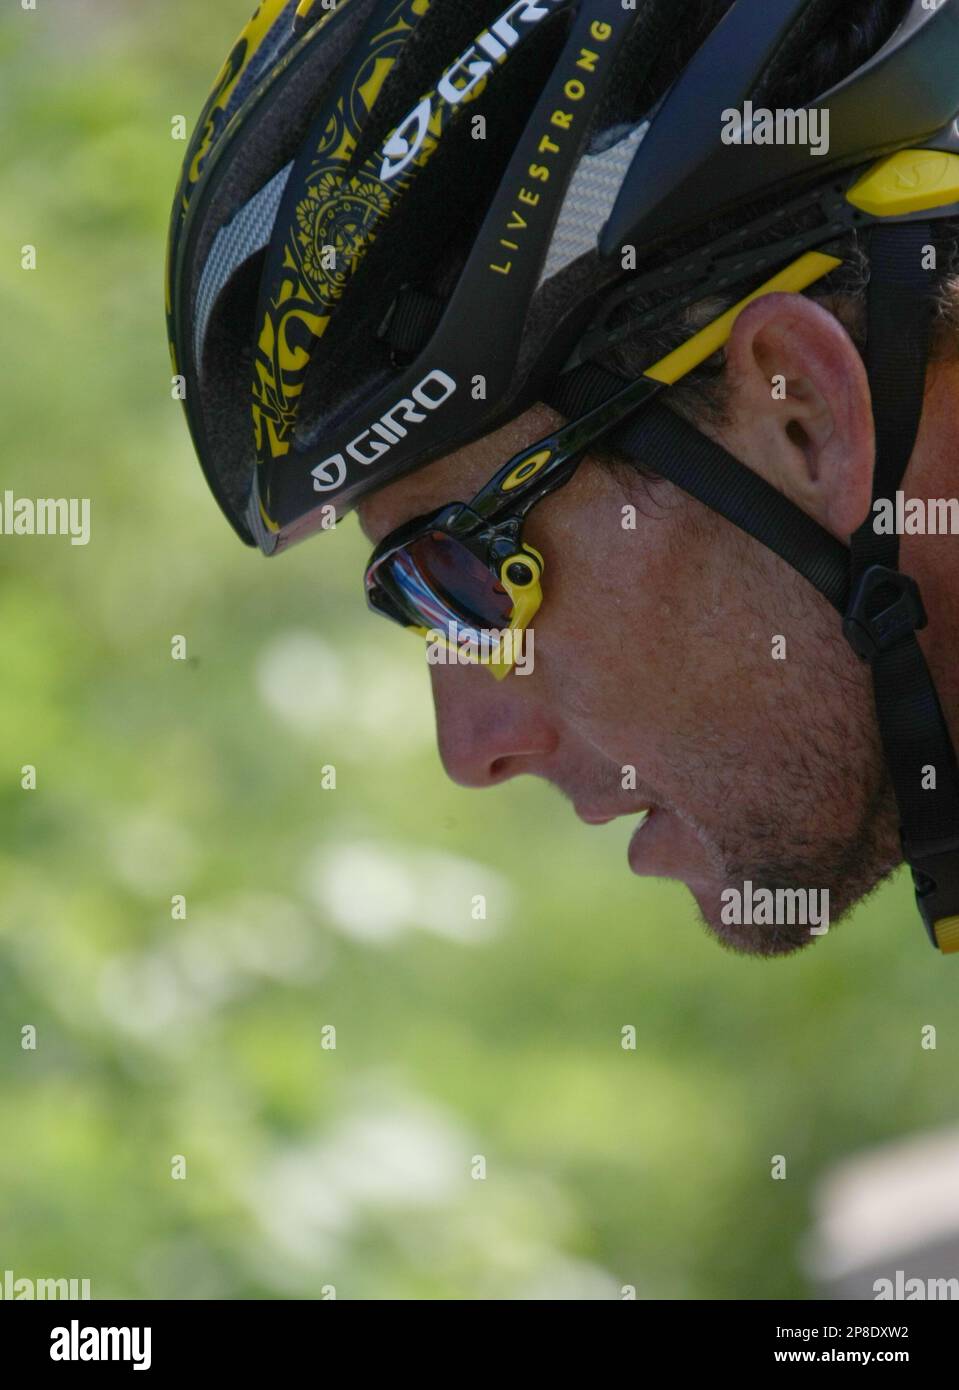 Wanorde uitroepen cel US Lance Armstrong pedals during the twentieth stage of the Giro d'Italia,  Tour of Italy cycling race, from Naples to Anagni, Saturday, May 30, 2009.  (AP Photo/Alessandro Trovati Stock Photo - Alamy